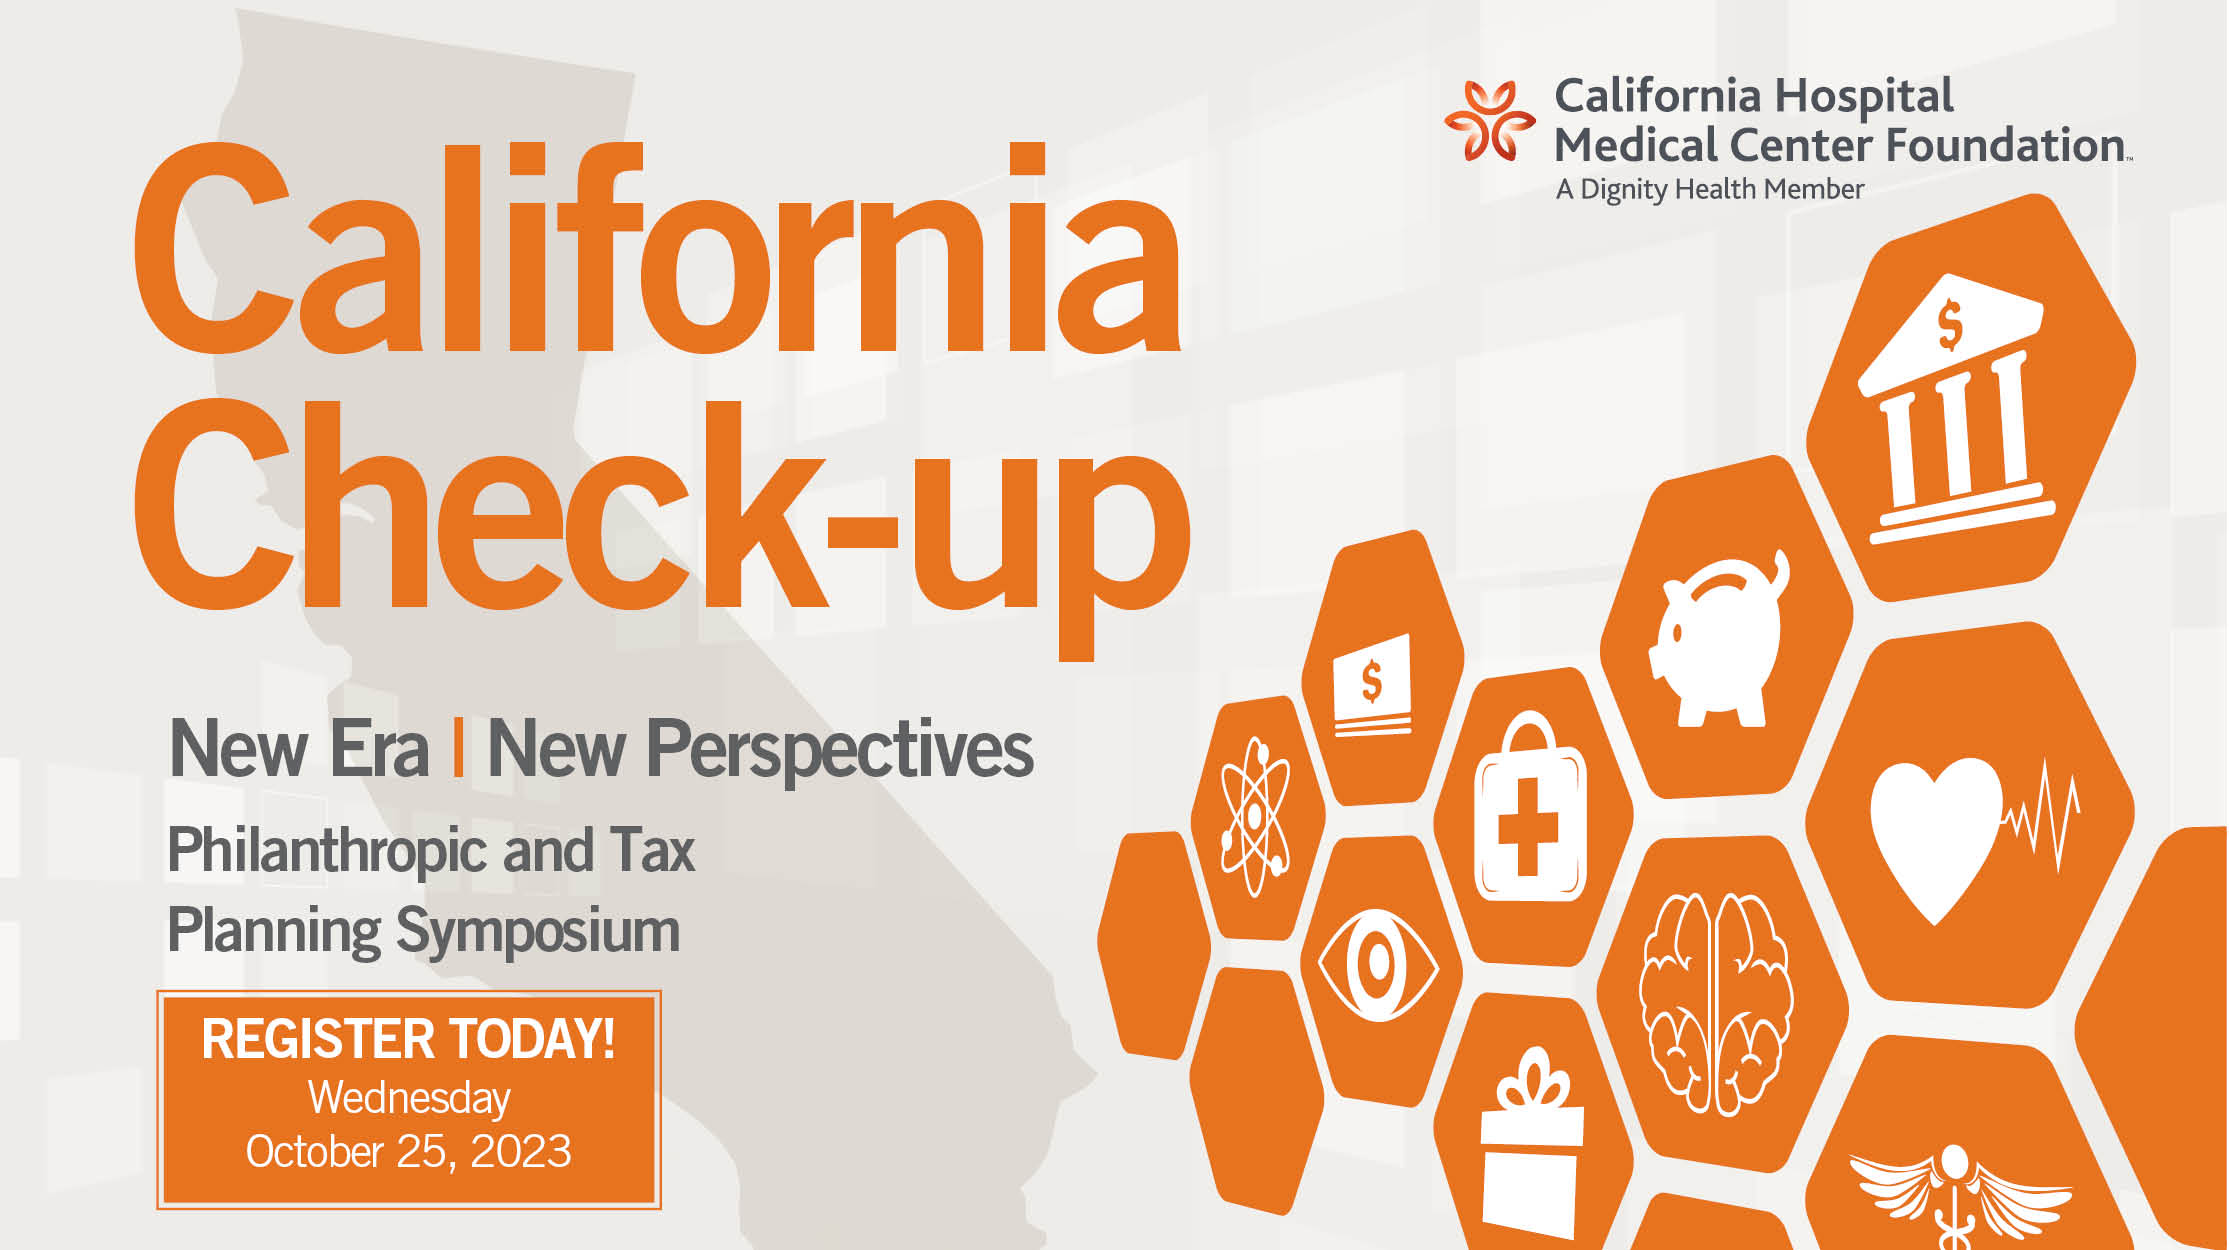 Register today for the 2023 California Check-up Philanthropic and Tax Planning Symposium